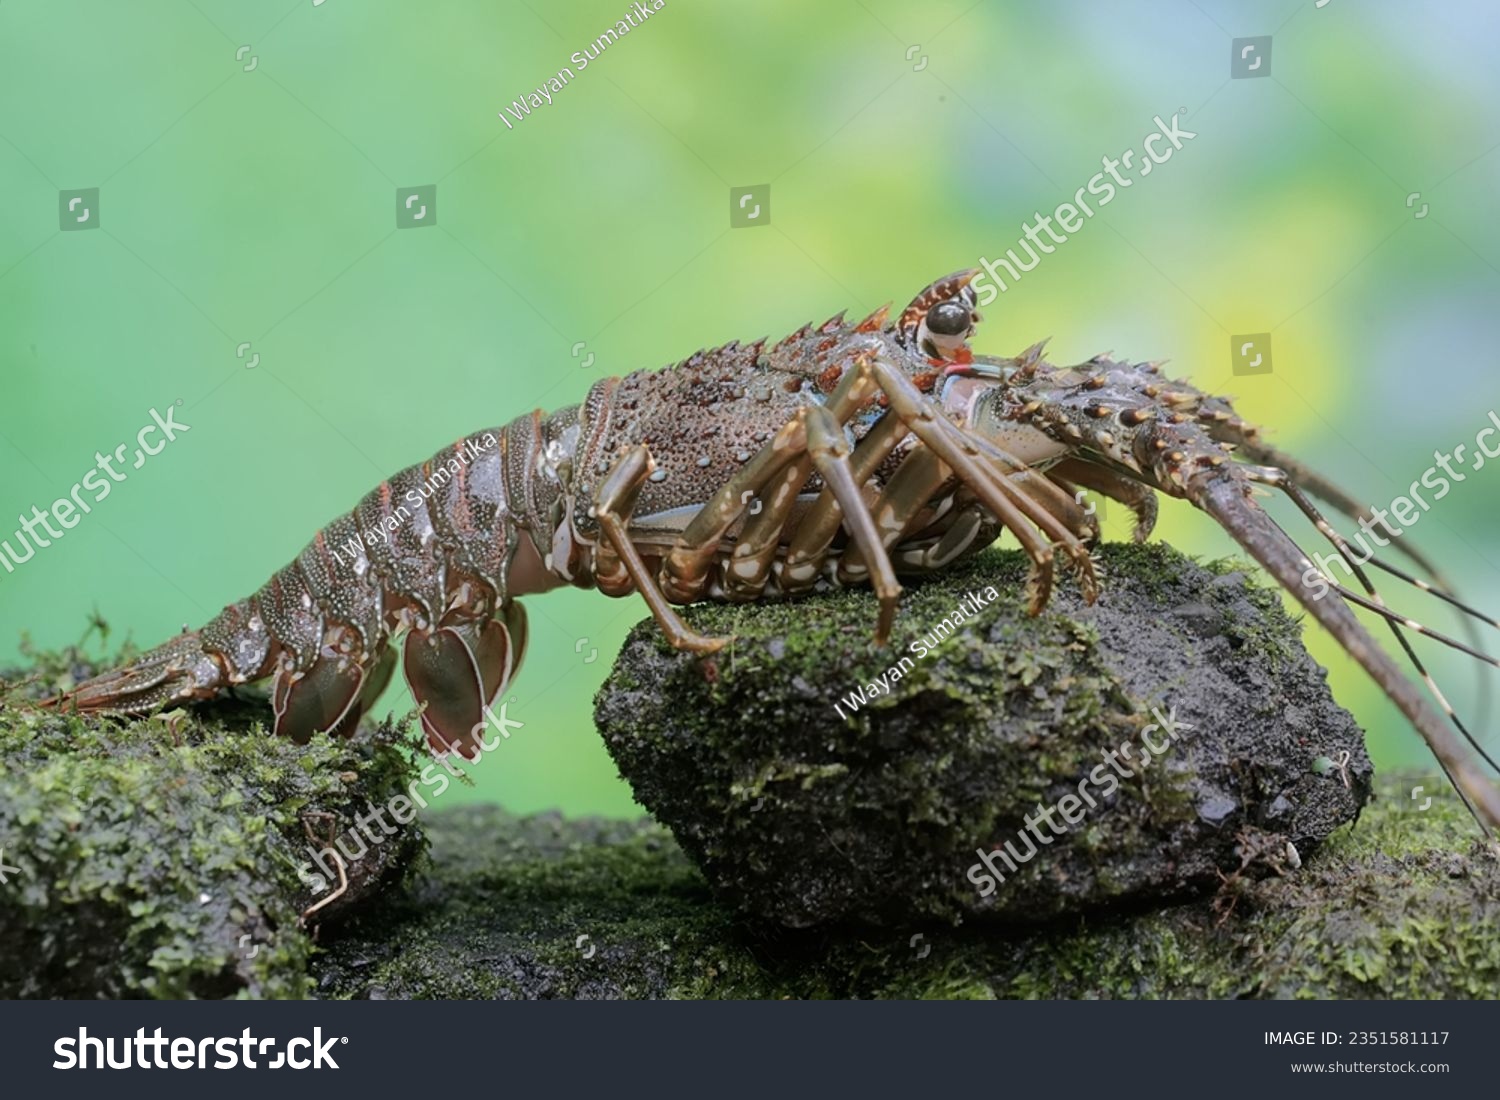 A brown rock lobster looking for food in shallow sea water where there is a lot of algae growing. This marine animal with high economic value has the scientific name Panulirus homarus. #2351581117